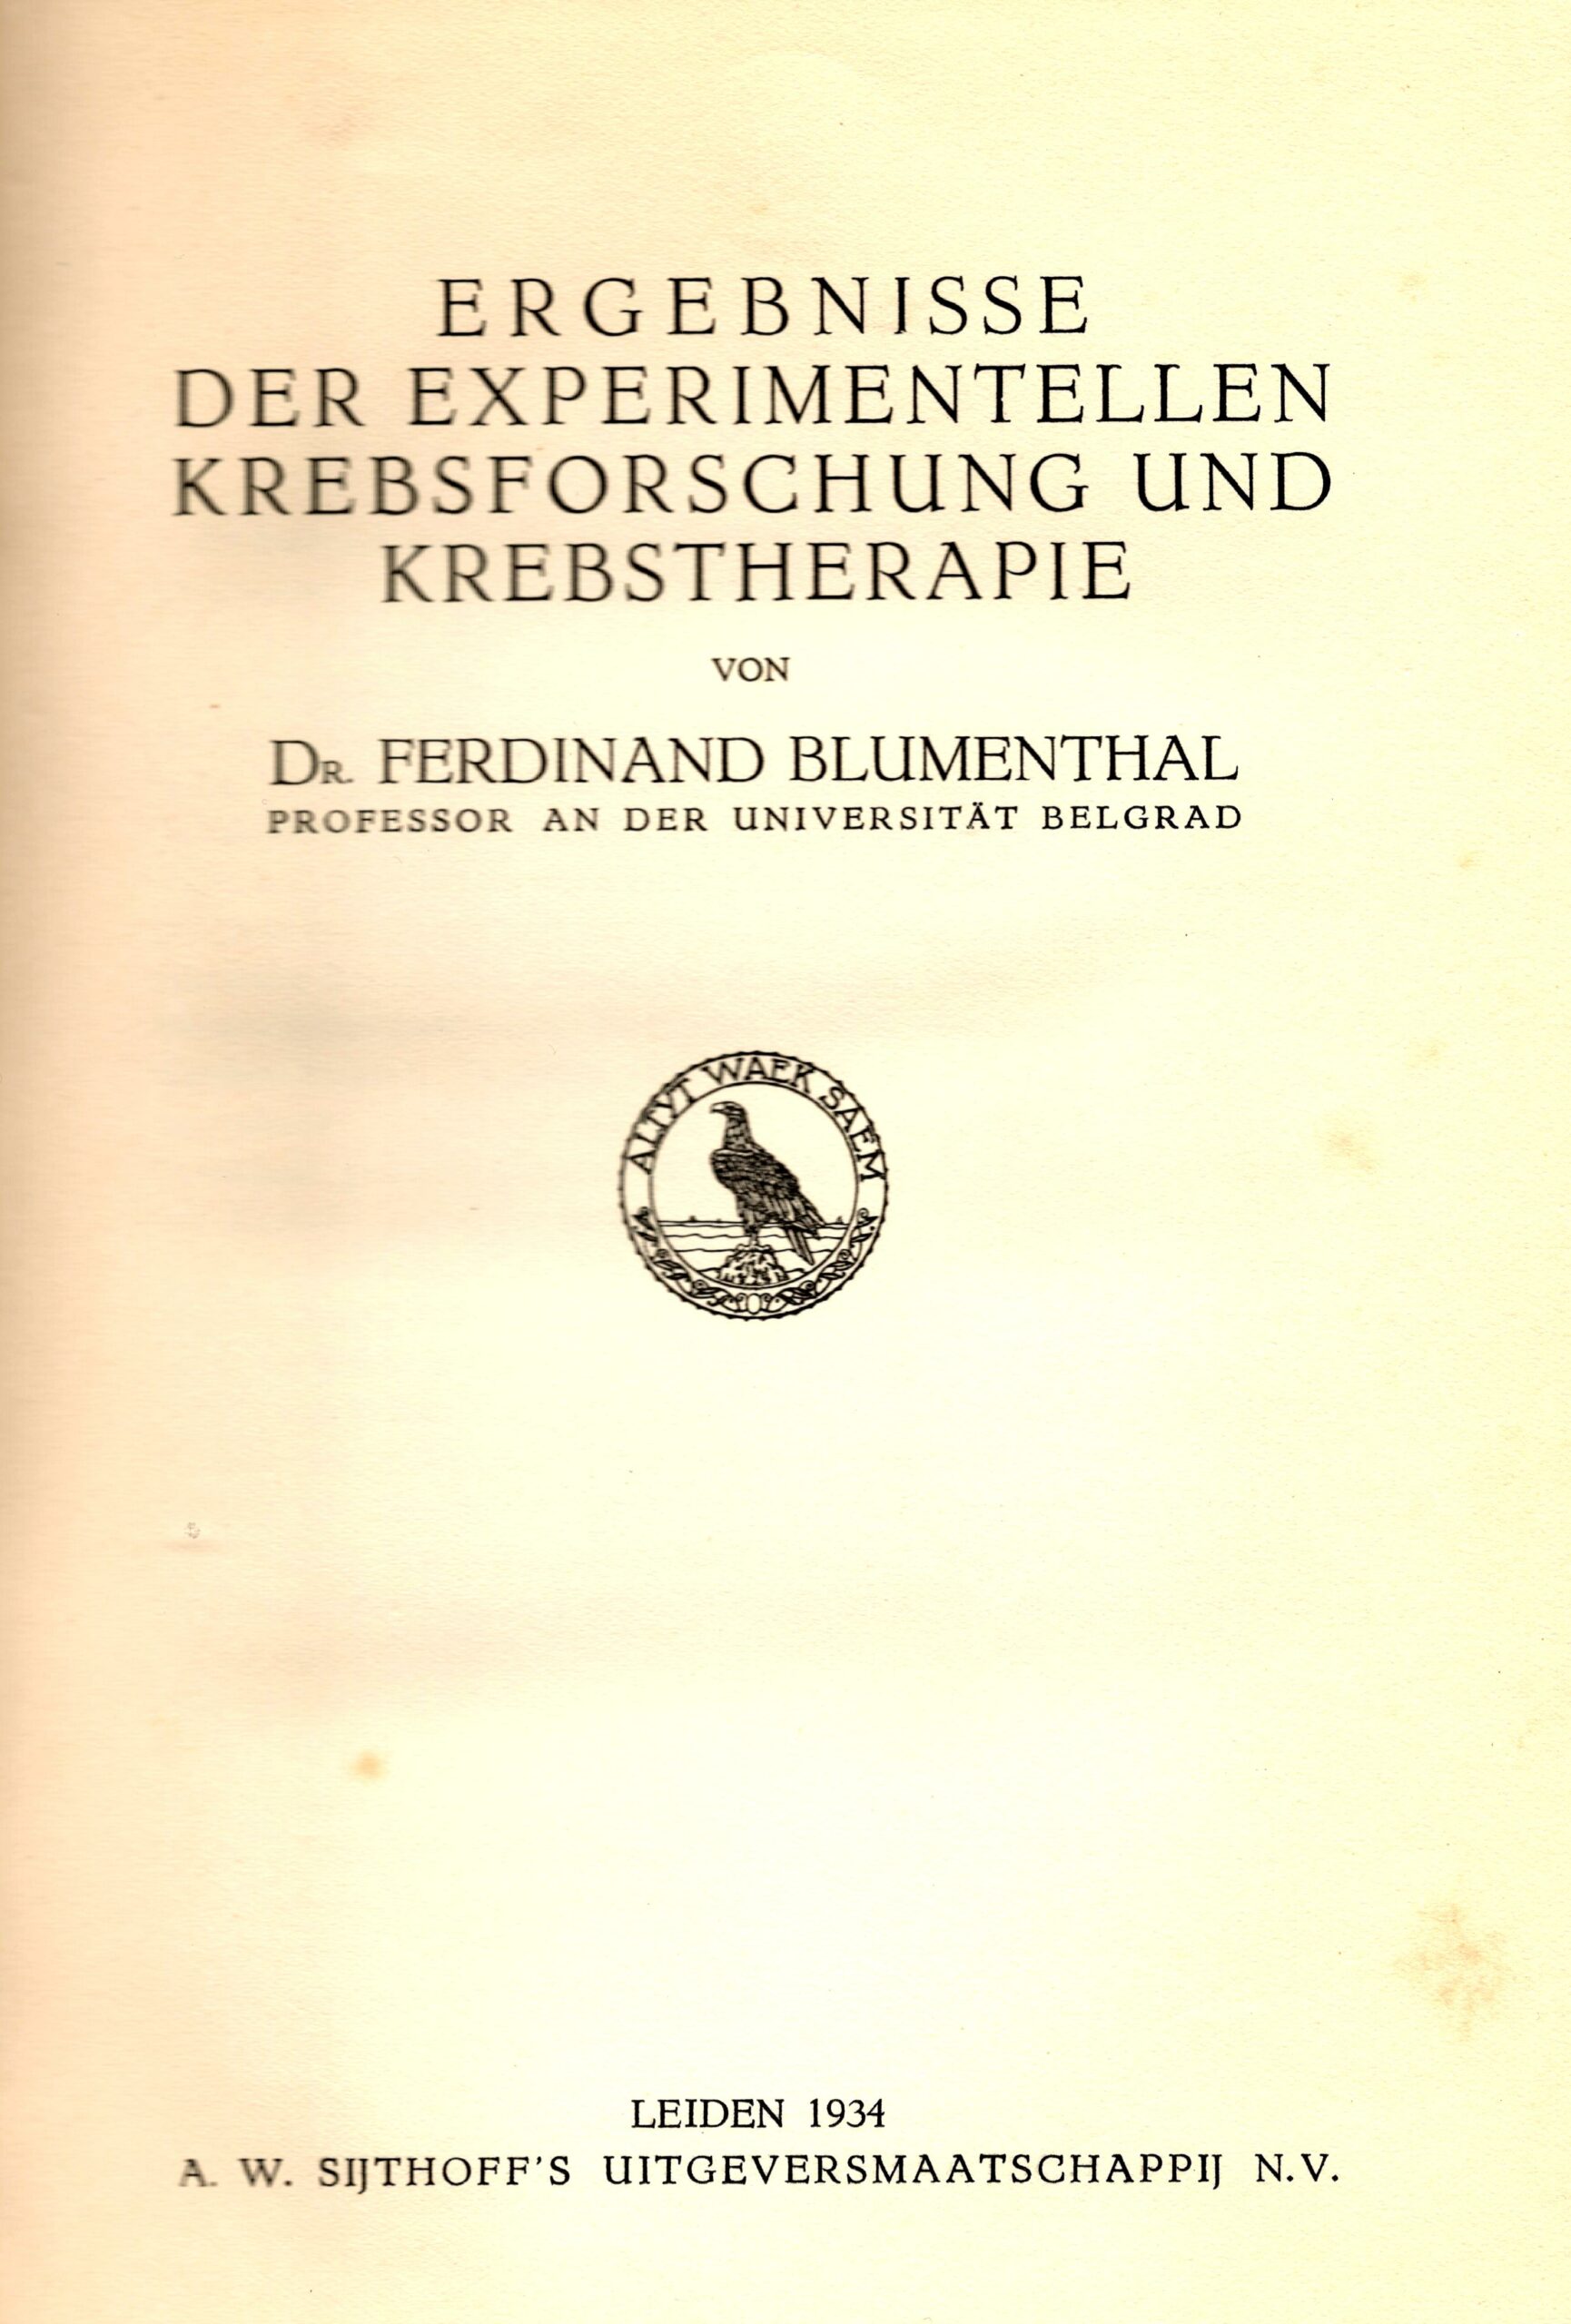 Blumenthal's principal work had to be published outside of Germany in 1934